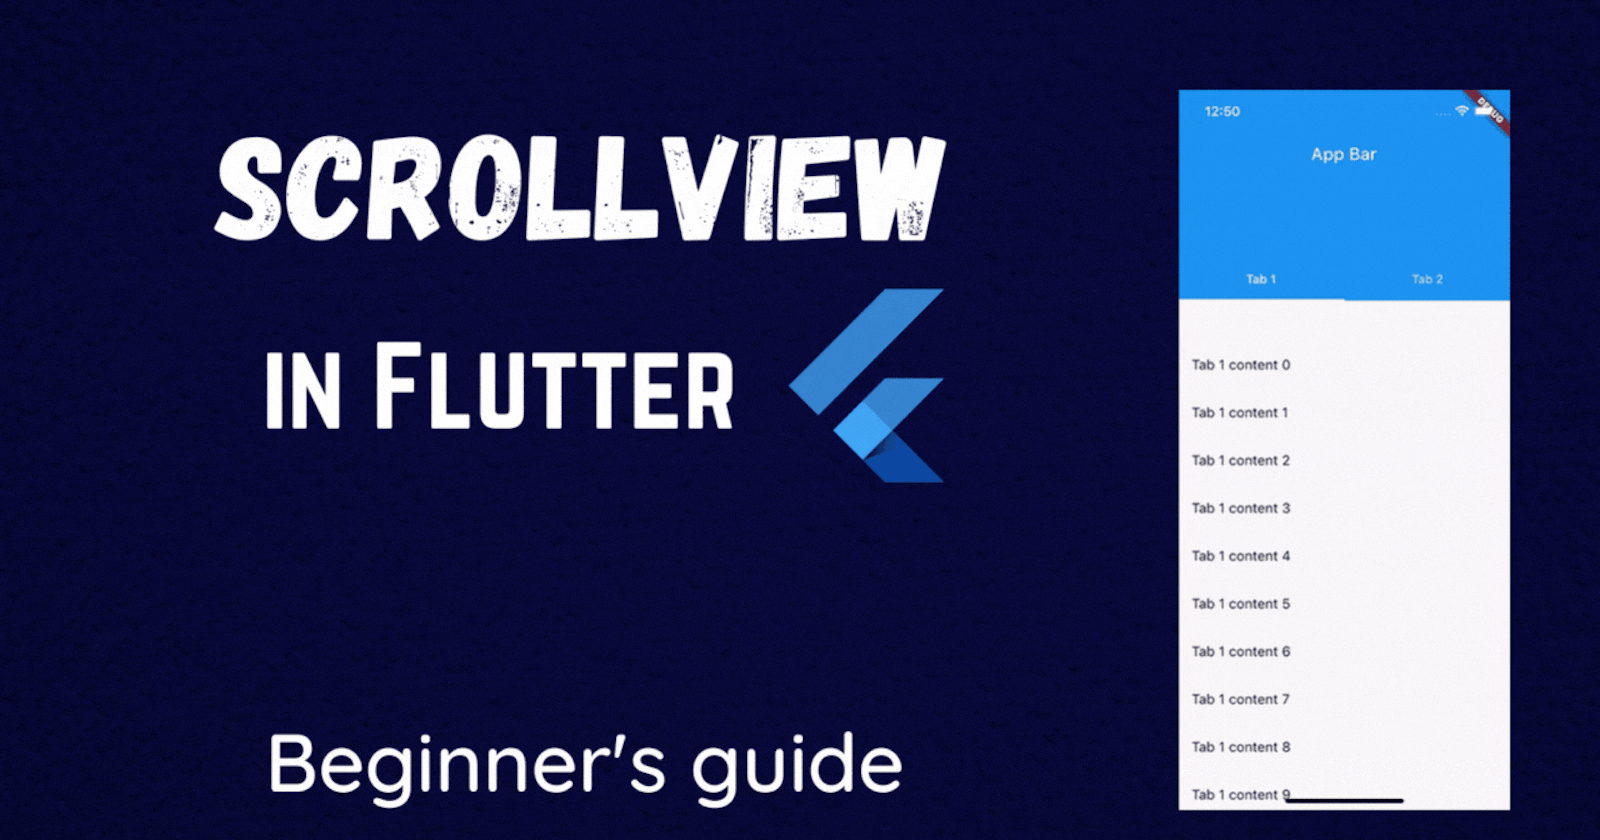 Learn about ScrollView in Flutter: An Introduction